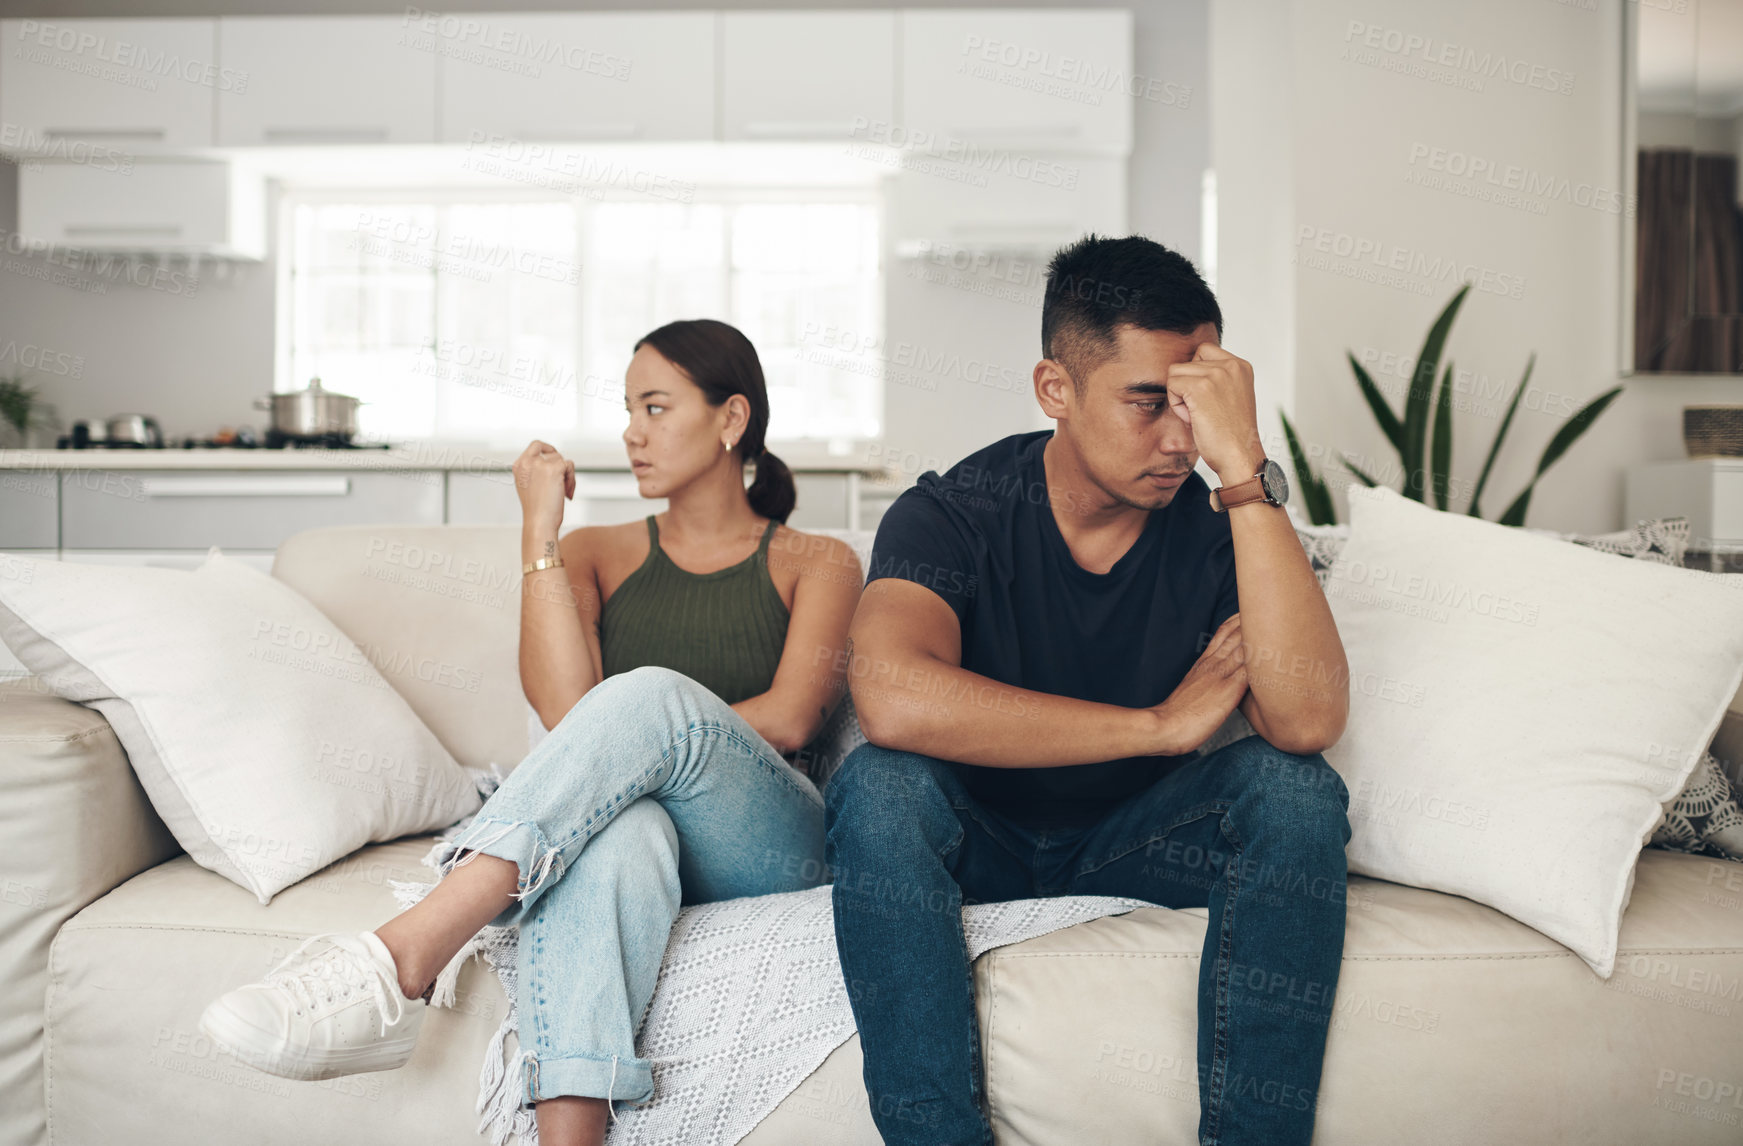 Buy stock photo Divorce, angry or couple fight on sofa with anxiety, fear or frustrated by liar, stress or drama at home. Marriage, conflict or asian people argue in living room with blame, overthinking or mistake